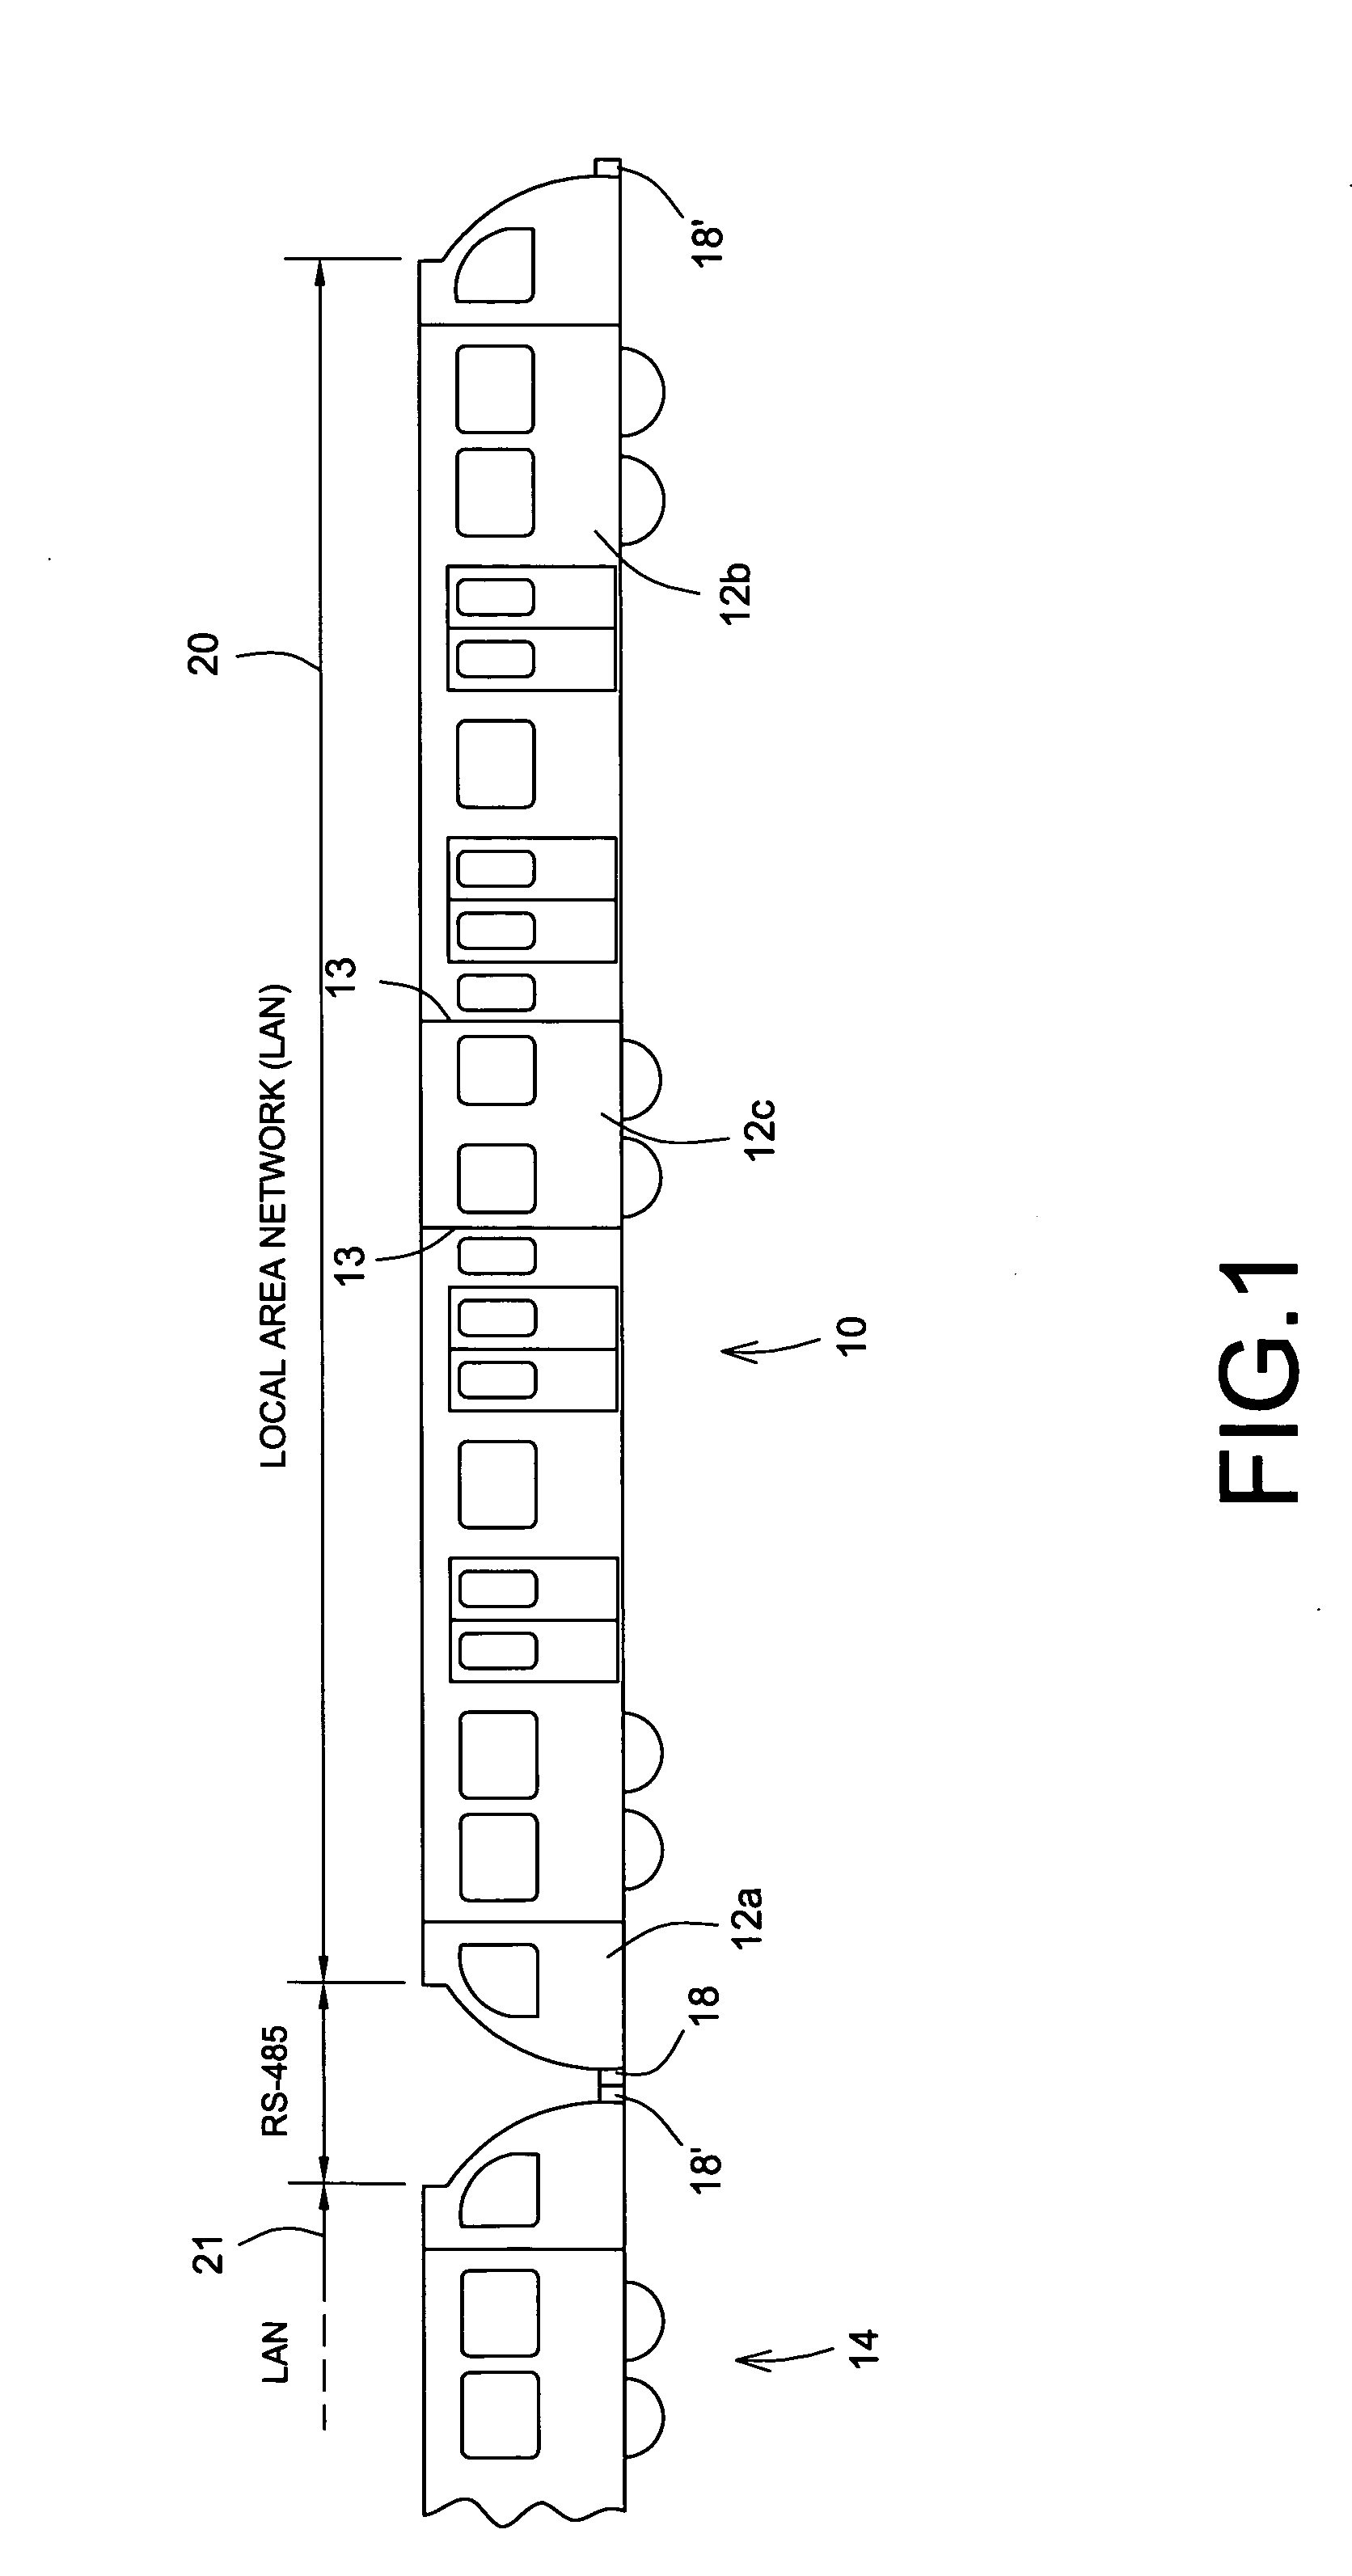 Communication circuit for a vehicle